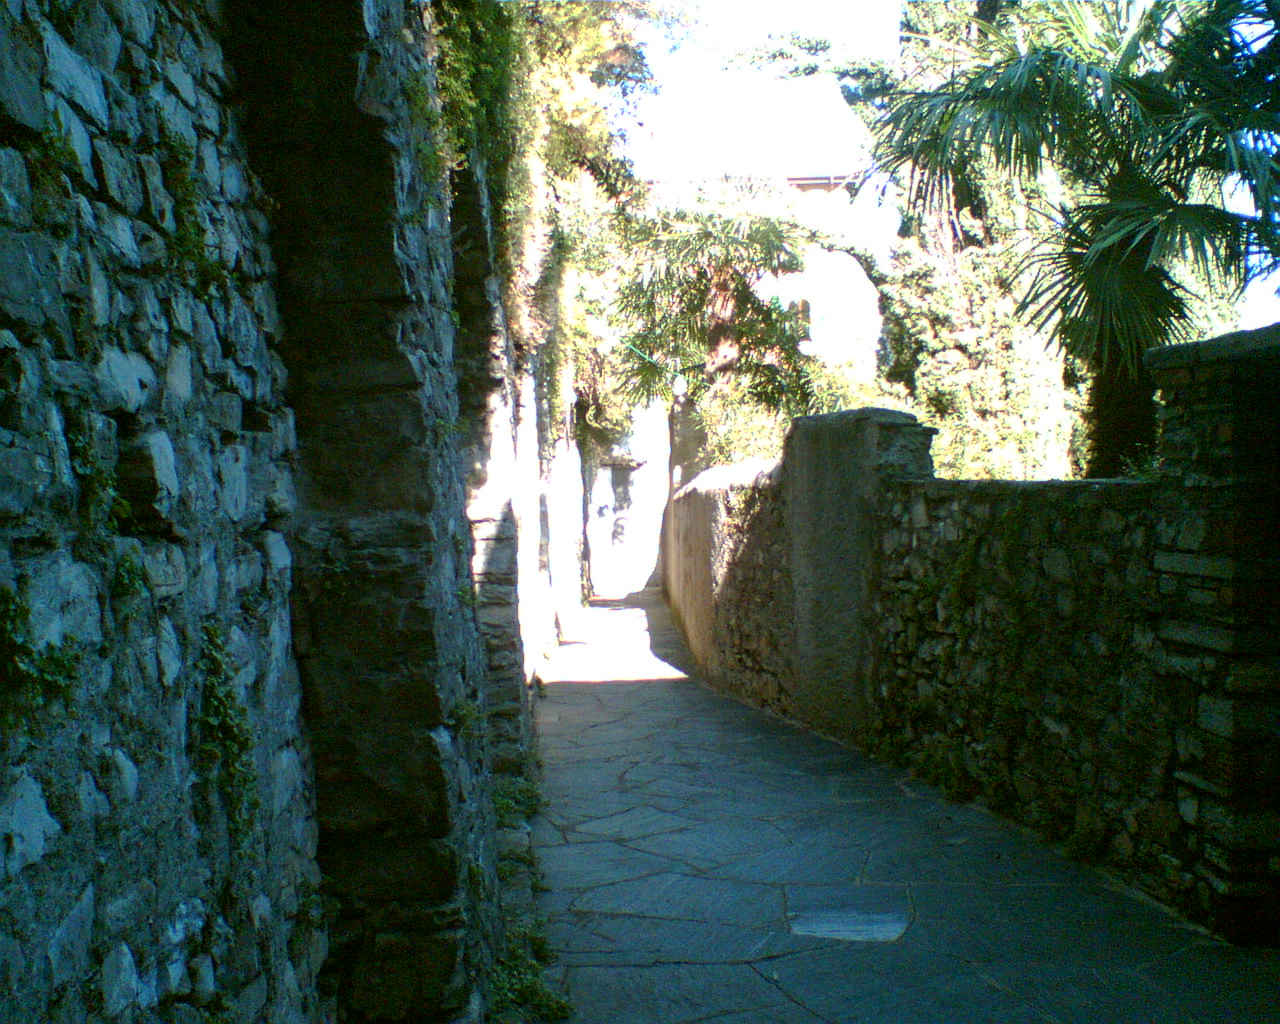 the walkway between the stone walls has stones on both sides